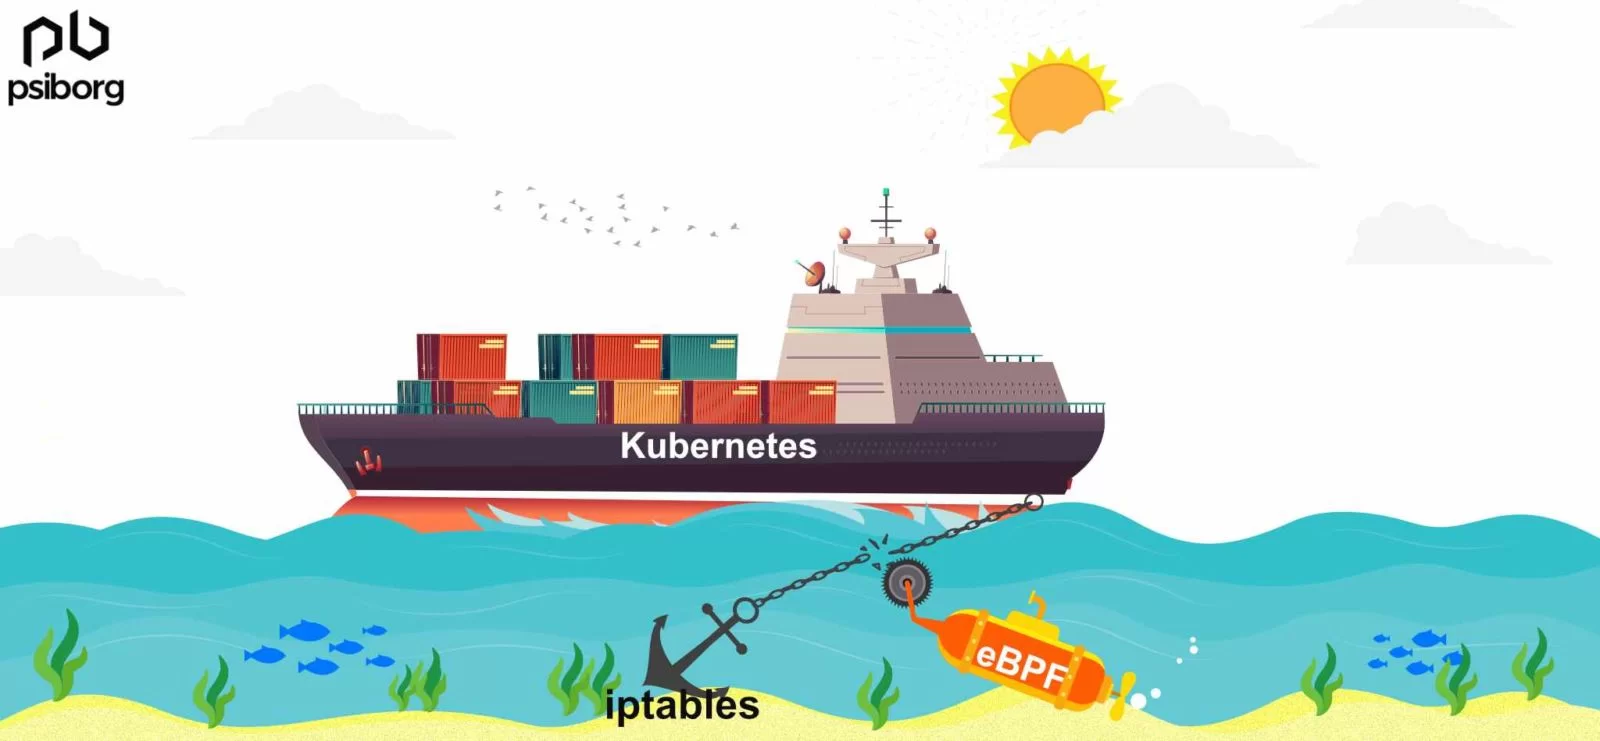 Building IoT Applications with Kubernetes